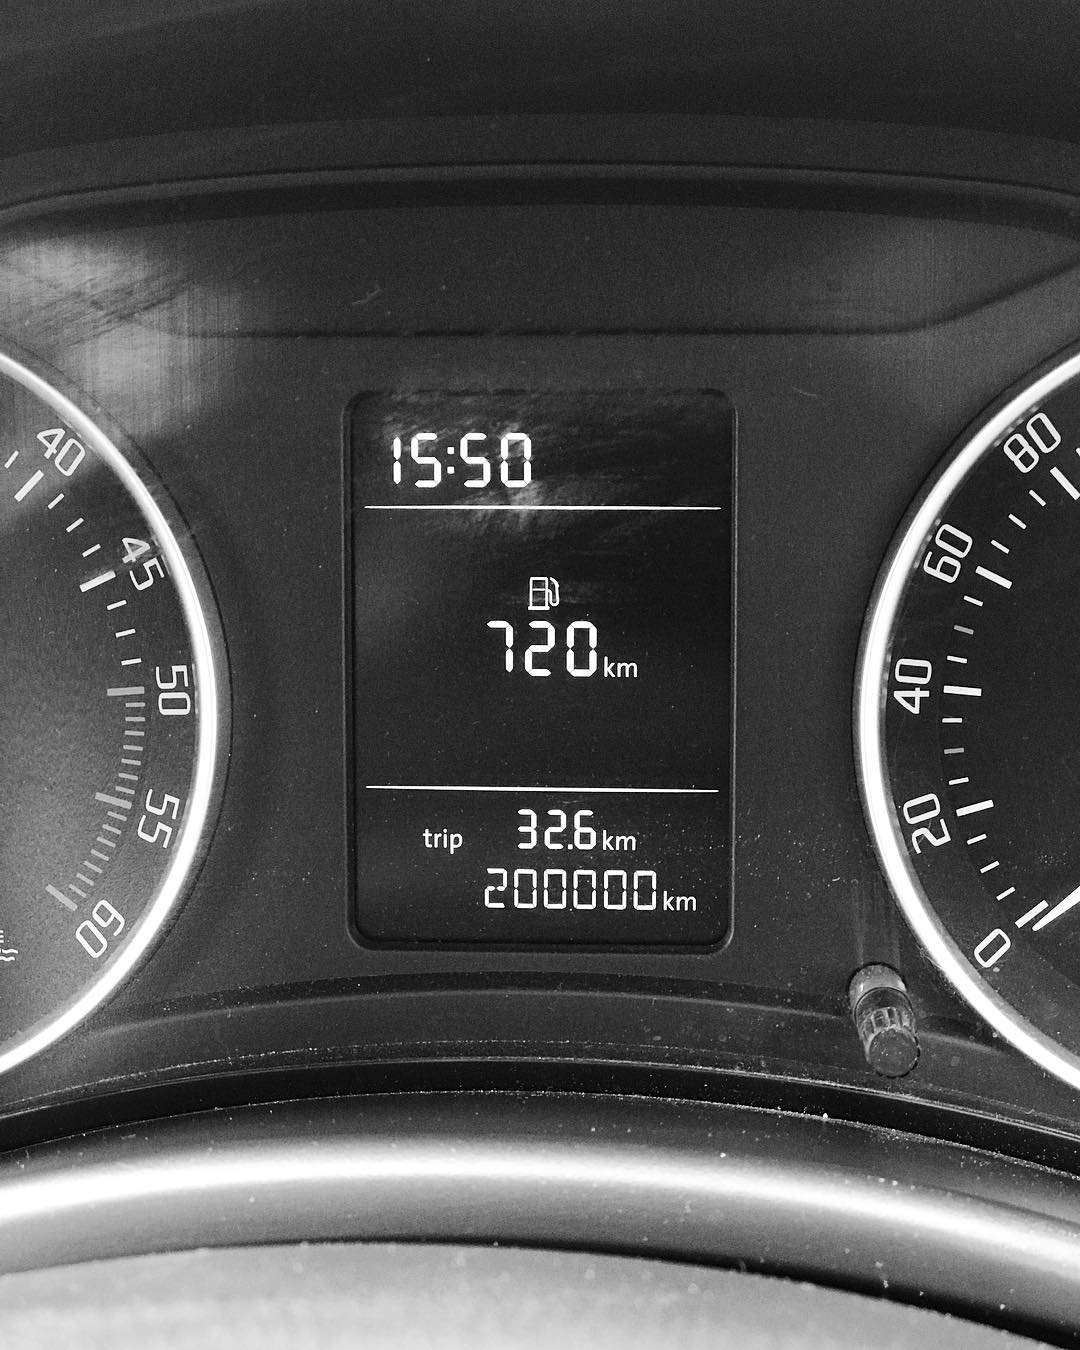 200000 Kms is like 5 times around the equator.
Thank You #Skoda for carrying me safe.
#drive #journey